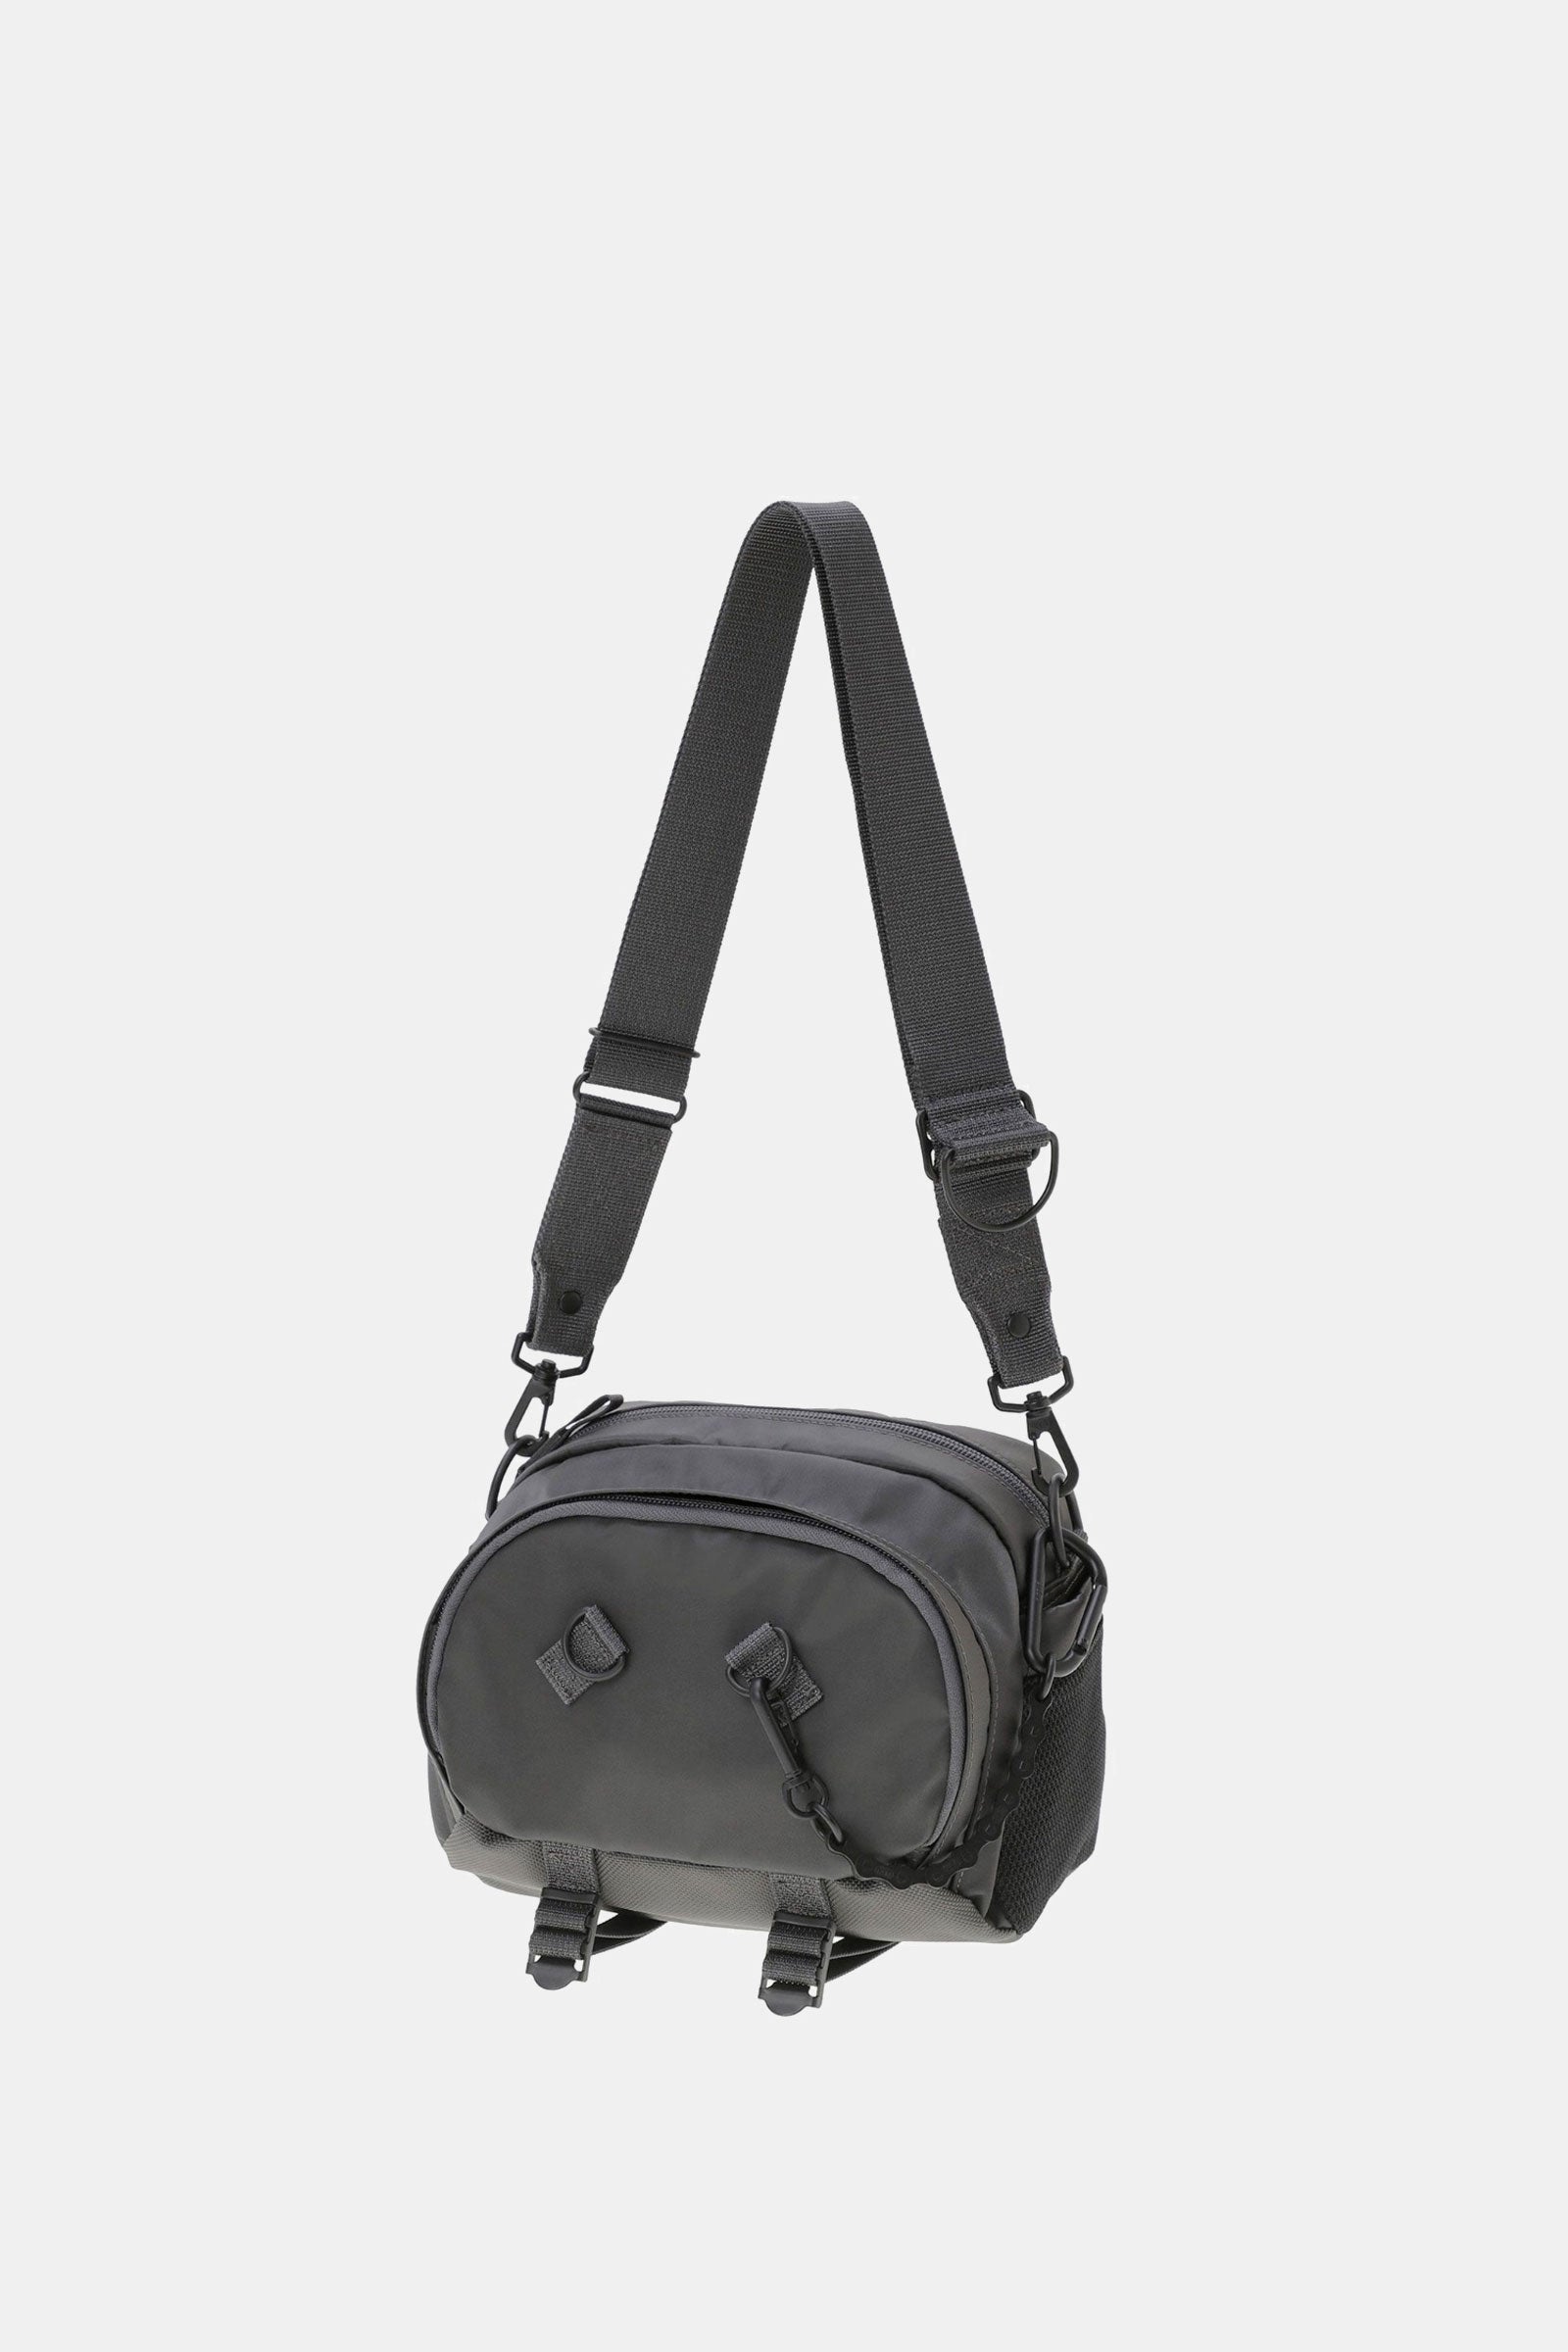 POTR Ride Shoulder Bag with Bicycle Chain